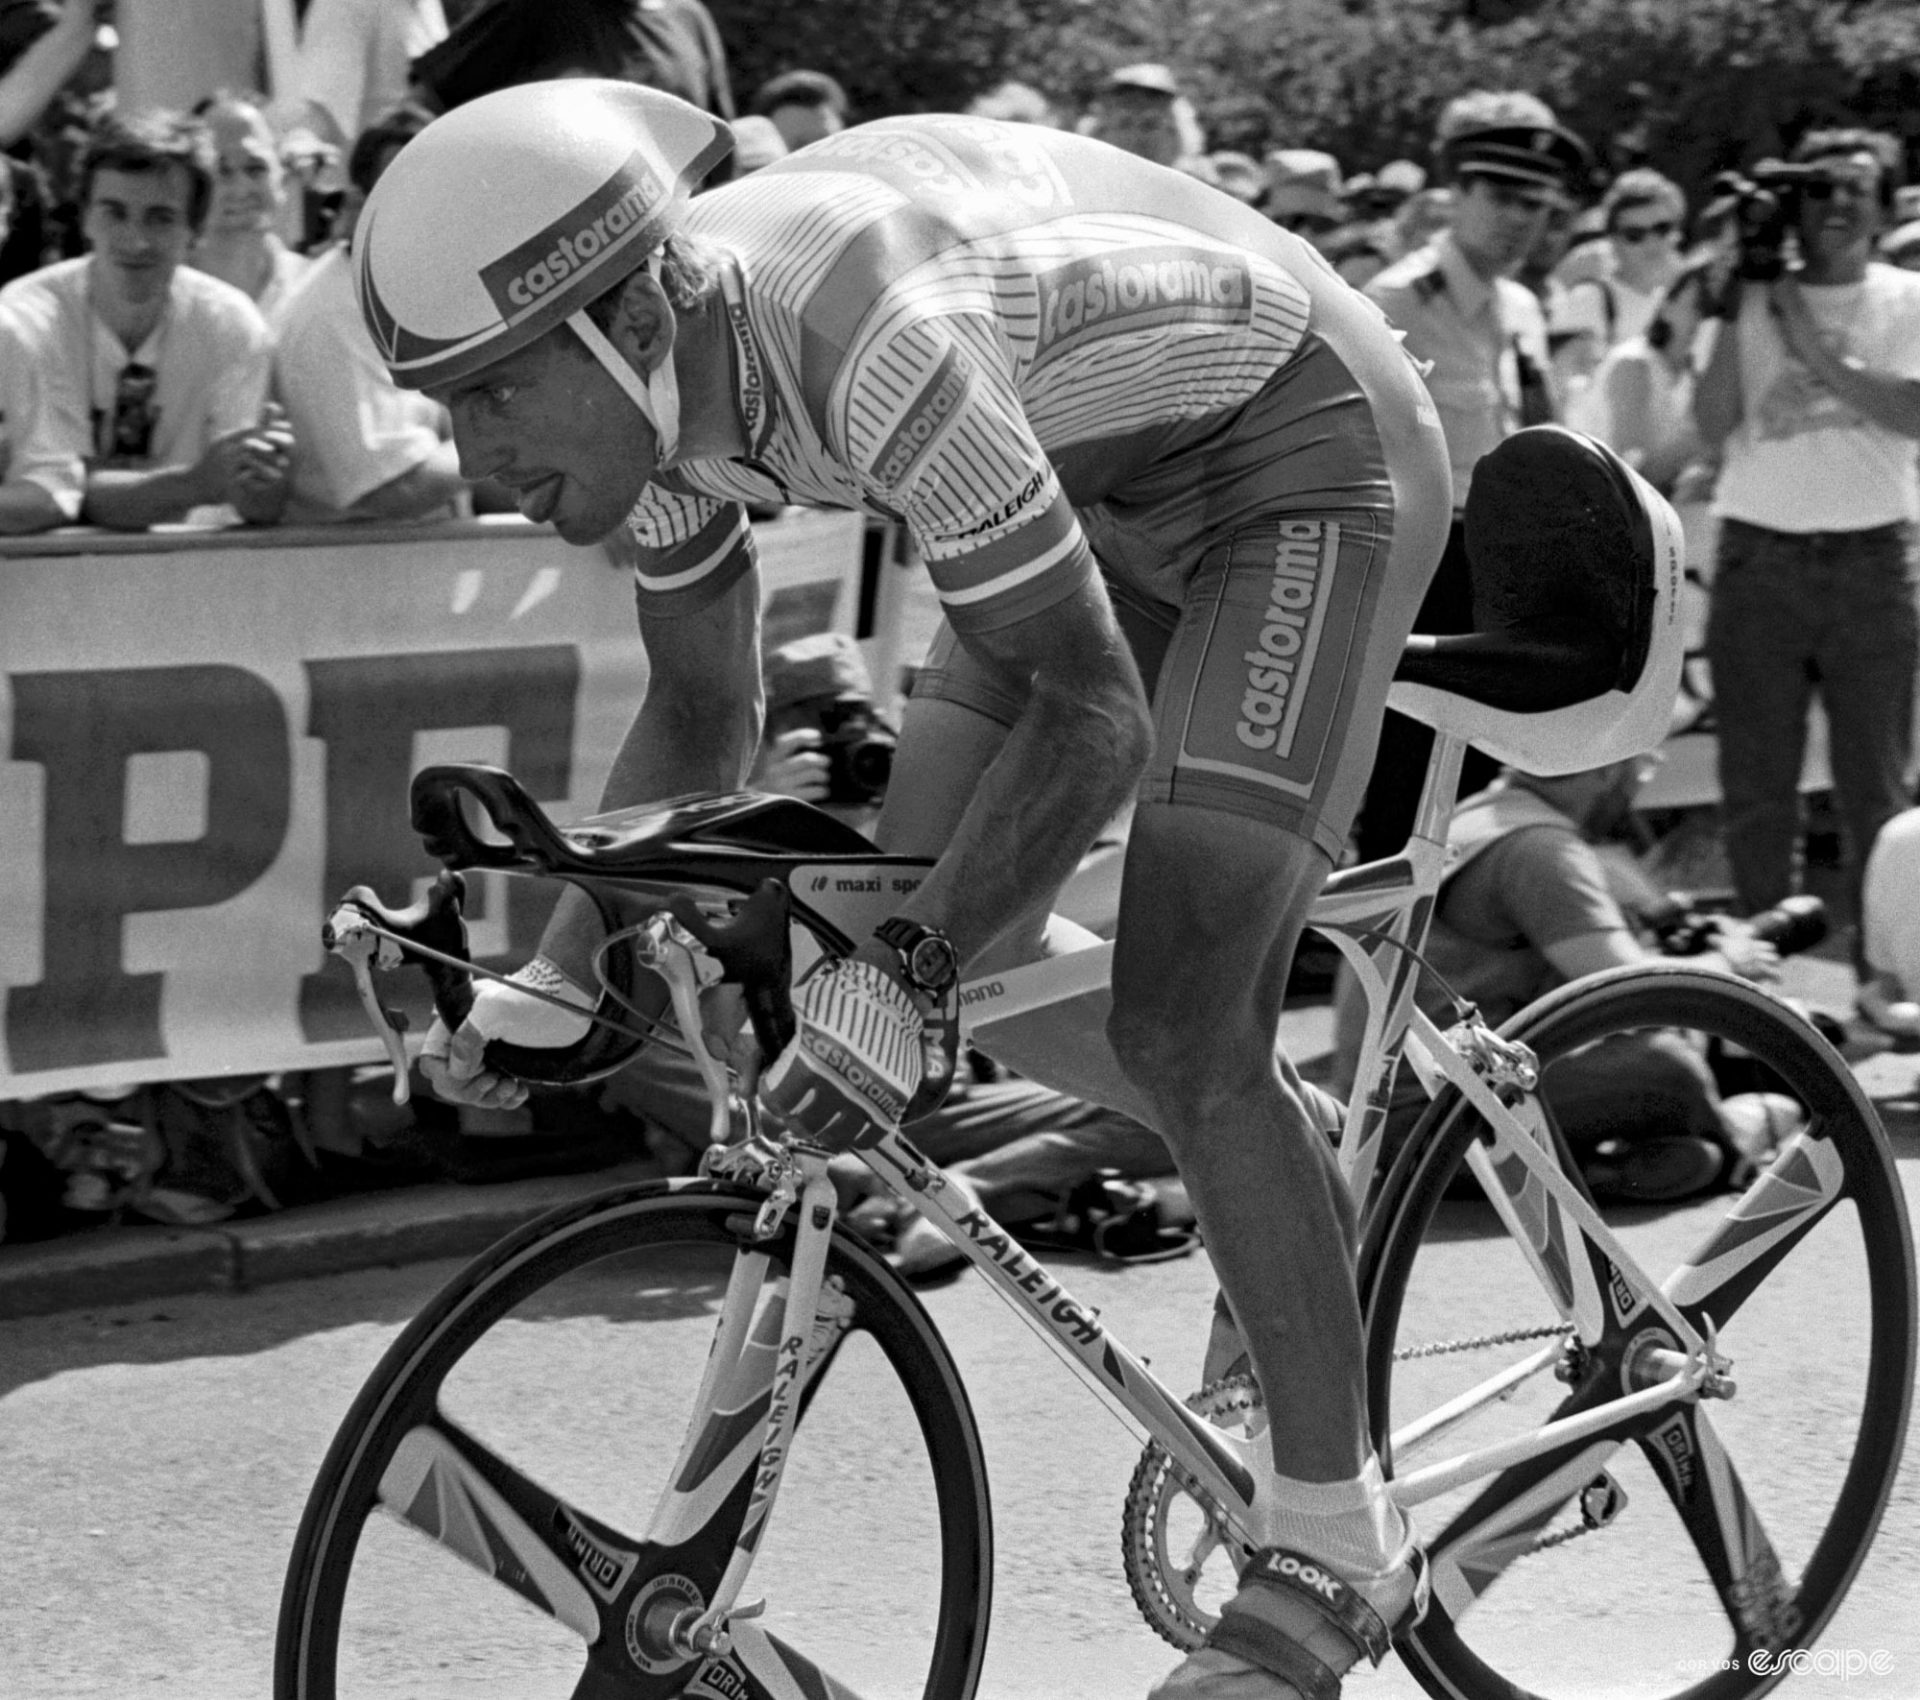 Thierry Marie in the 1991 Tour de France prologue.